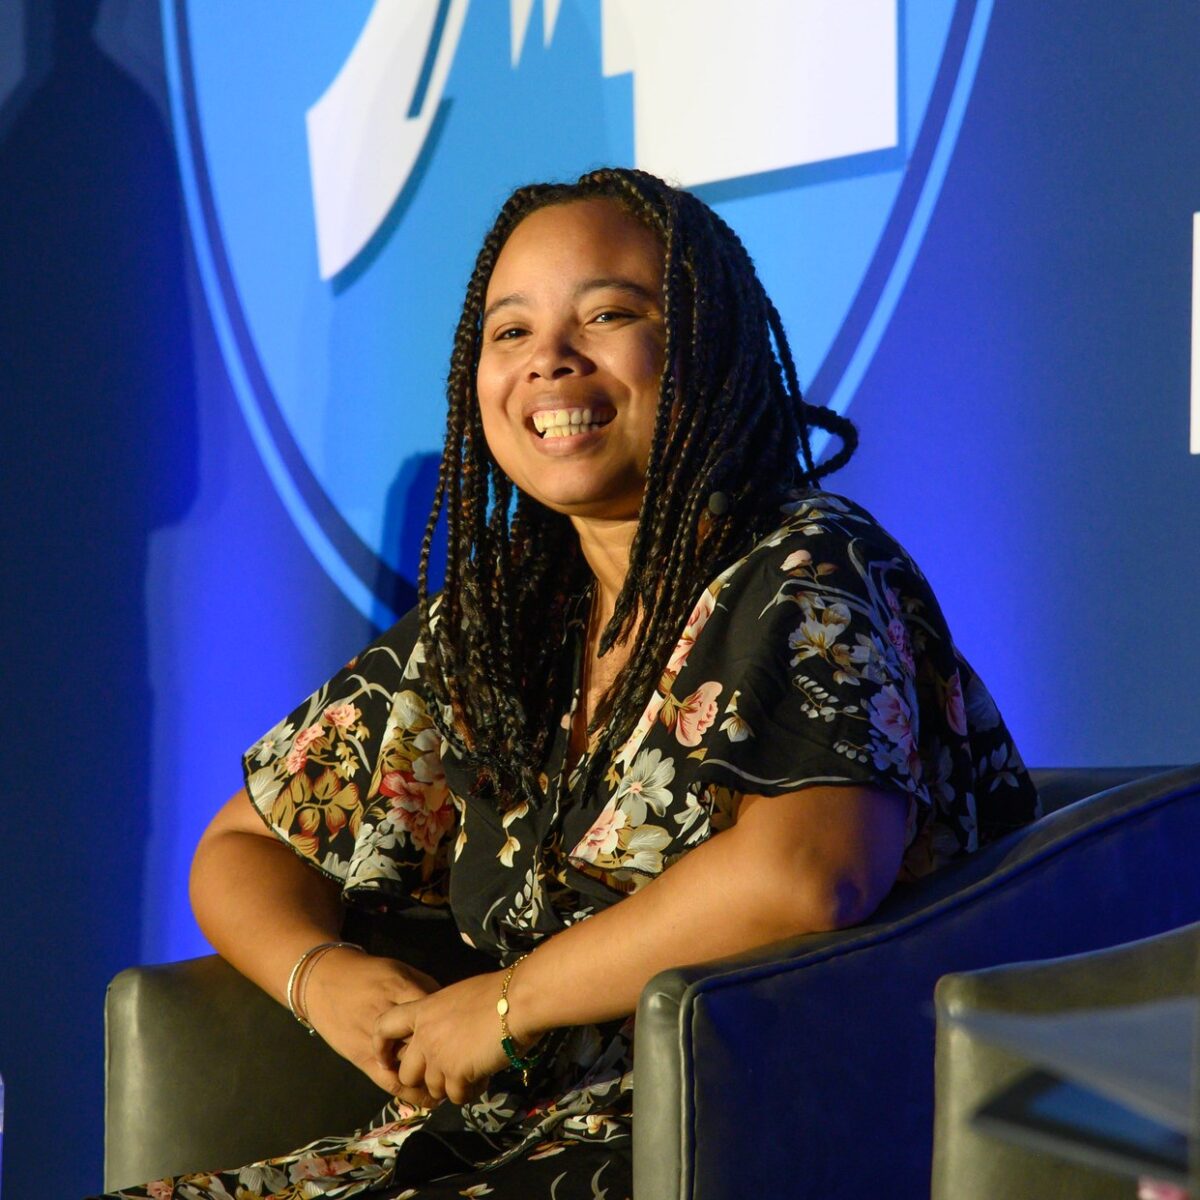 Candid photo of a woman with long locs sitting in a chair on a stage, smiling